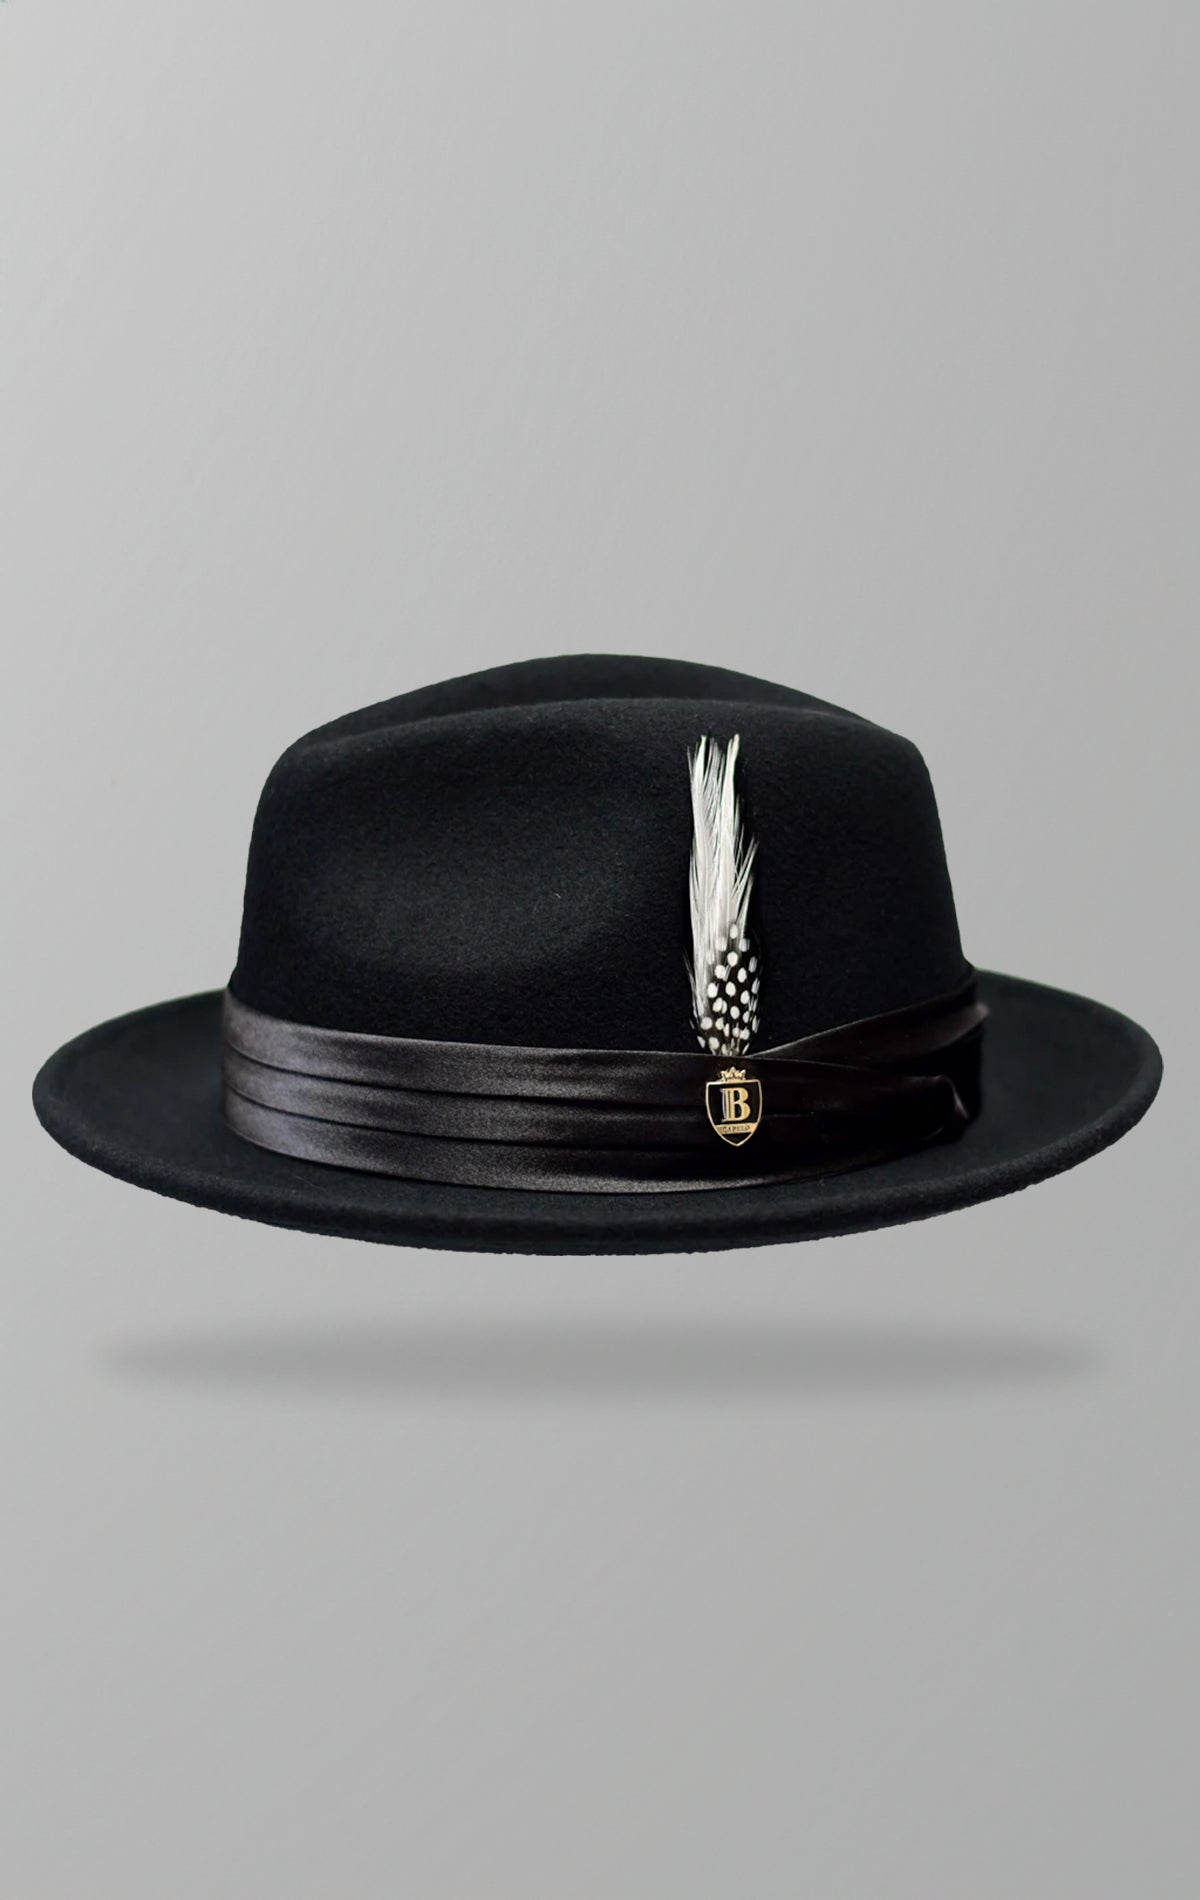 Classic wool fedora crafted from 100% fine Australian wool with a 2.25-inch brim, satin hat band, and removable logo pin.